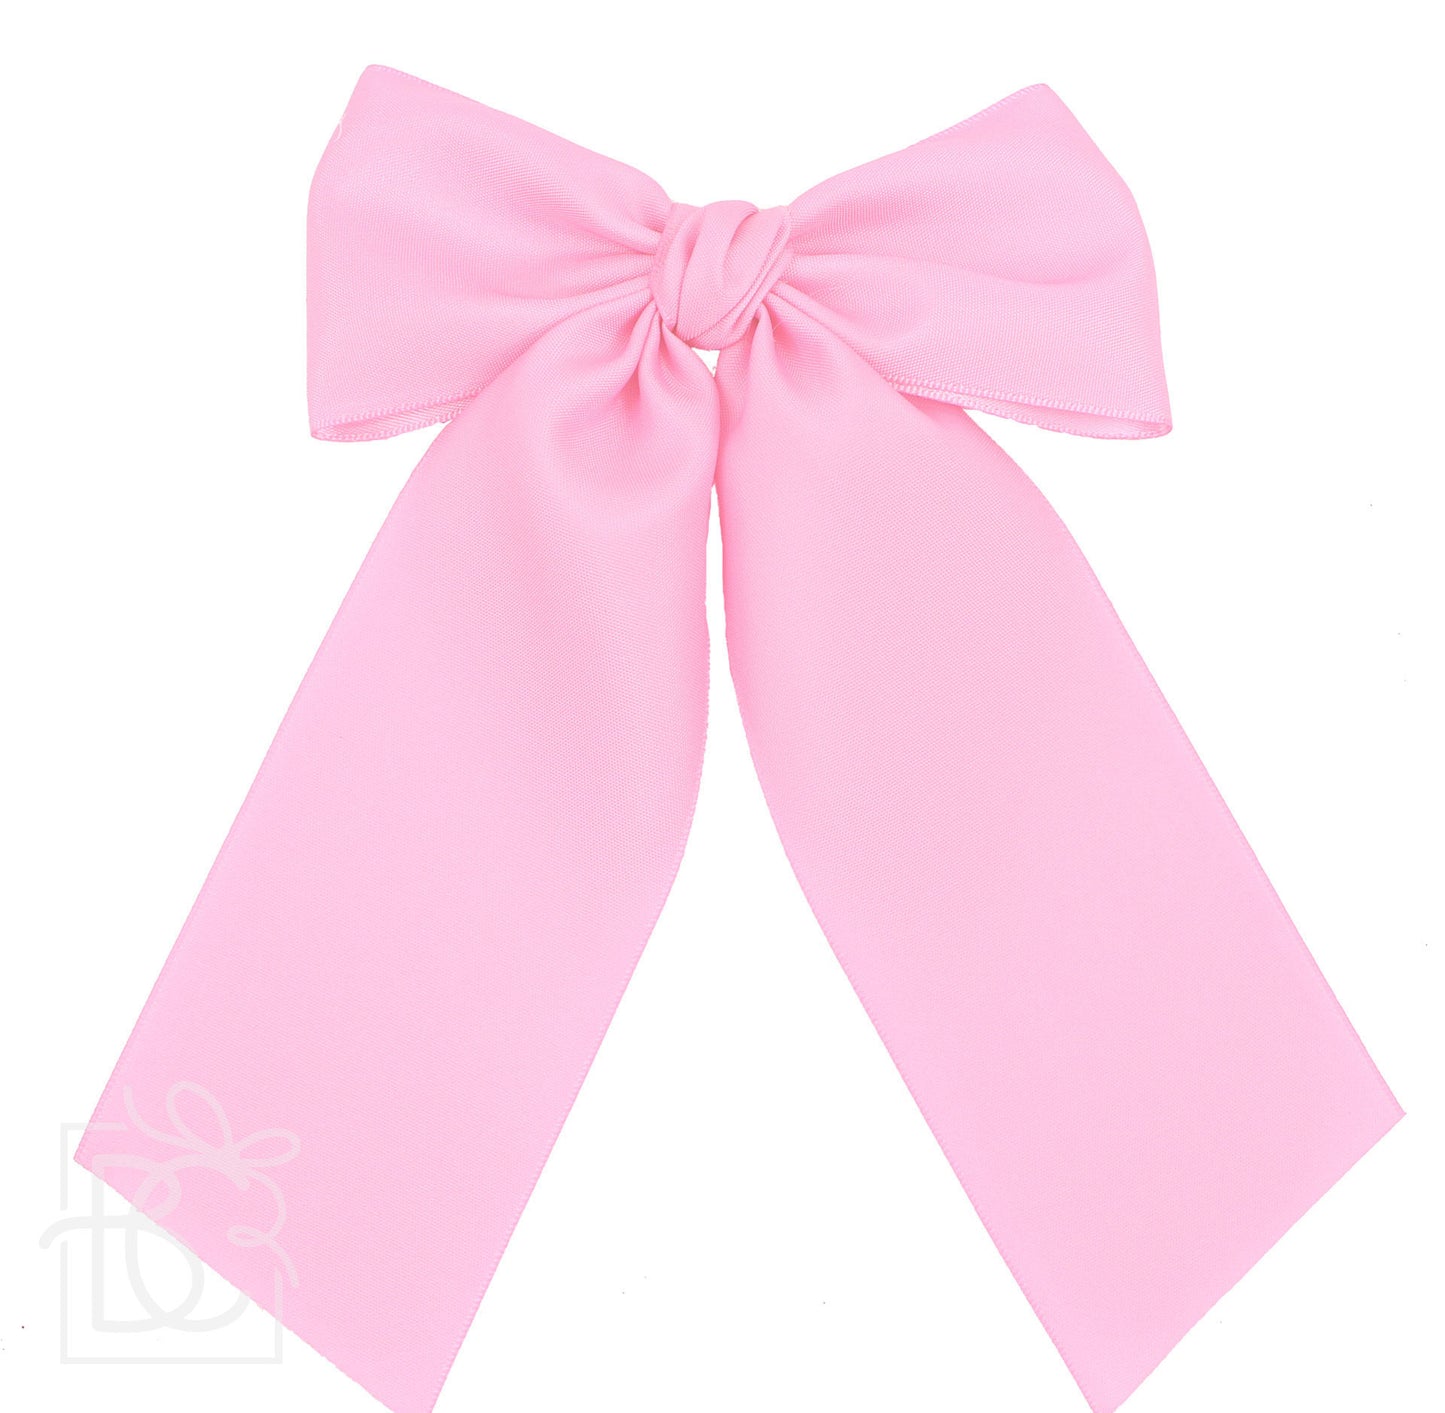 Beyond Creations - Opaque Satin Bow Knot/Tails 5.5"